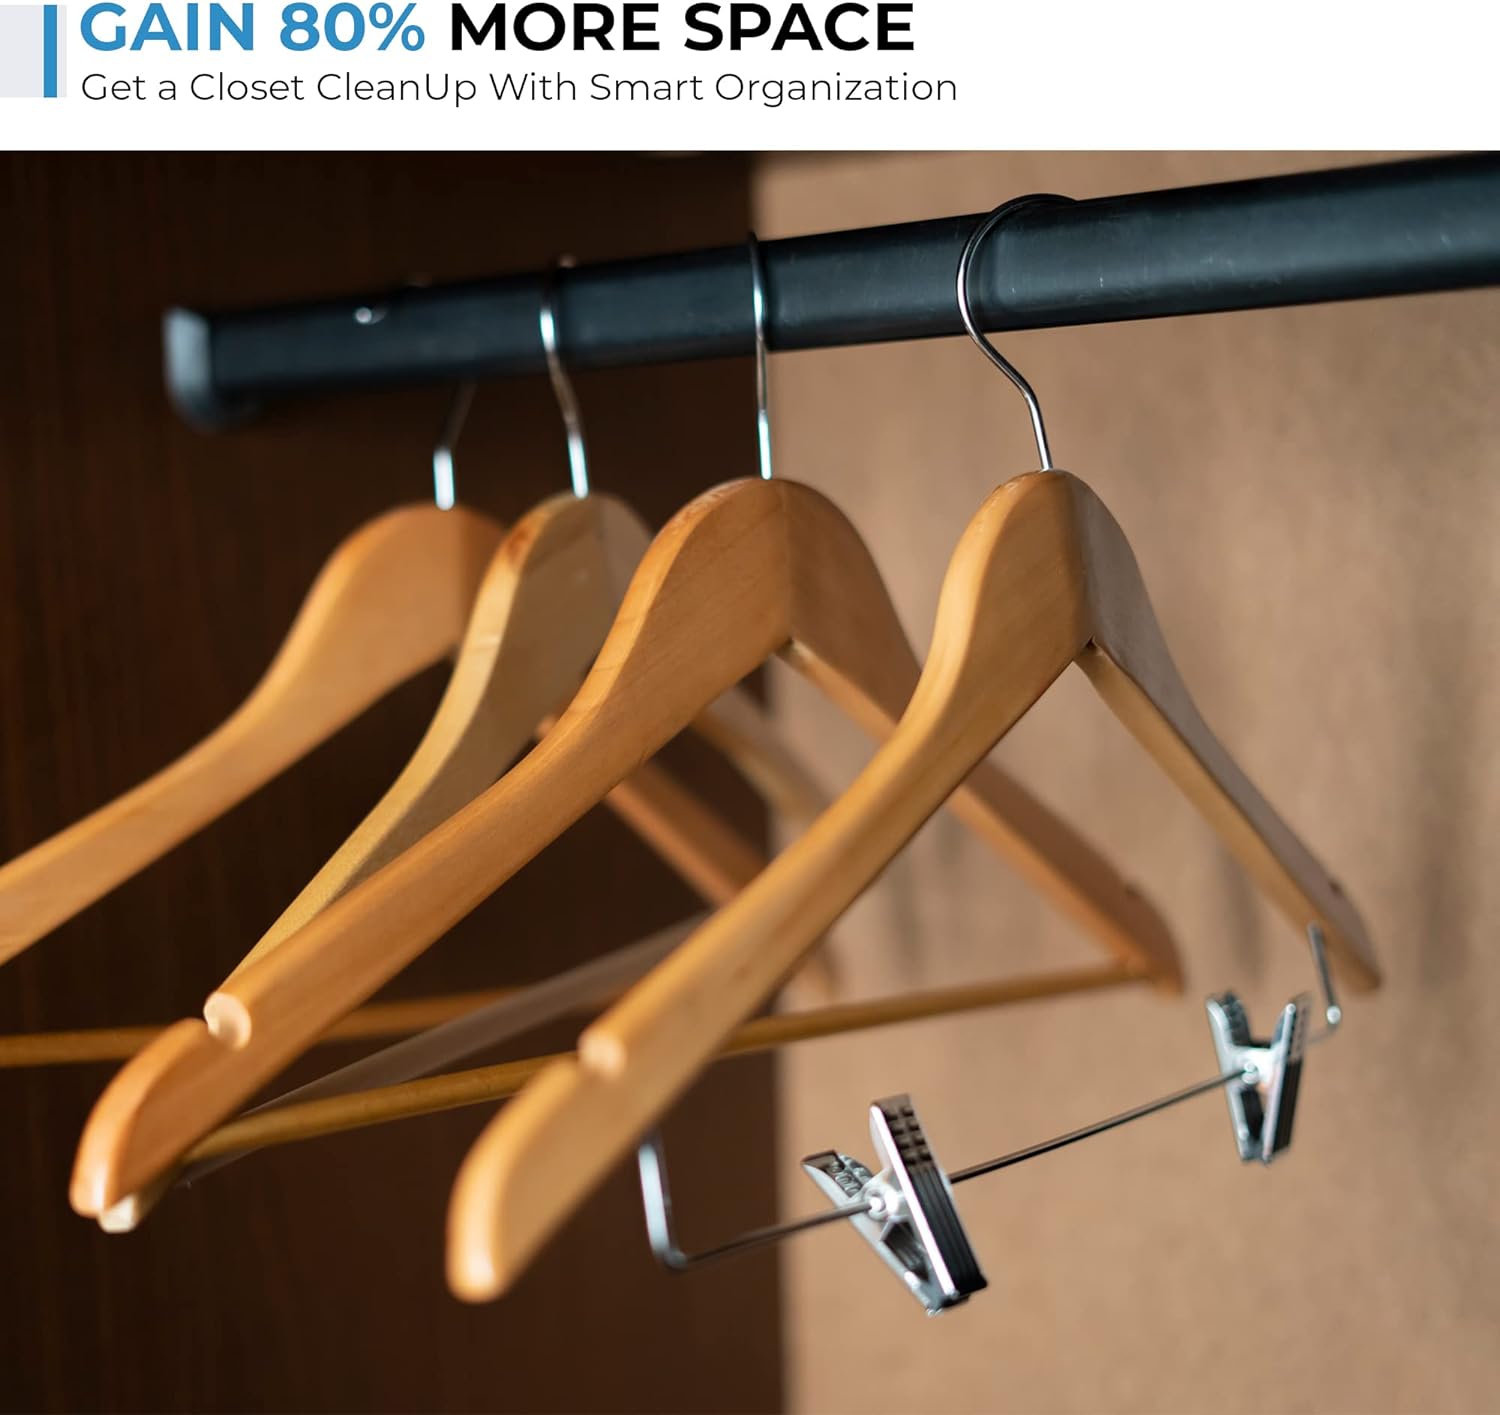 Style Selections 10-Pack Plastic Non-slip Grip Clothing Hanger